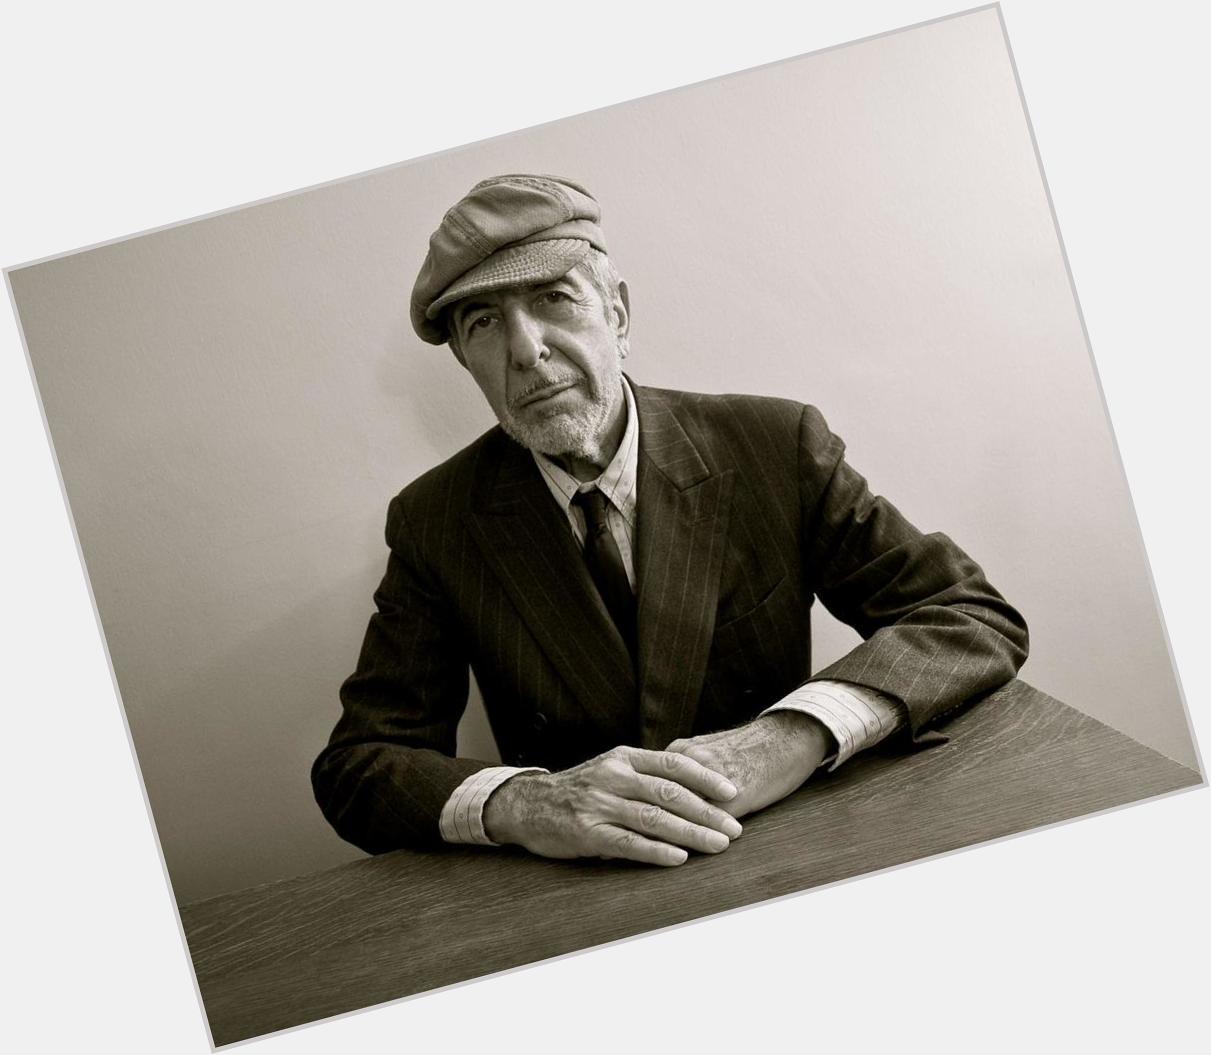 Wishing Mr. Leonard Cohen a very happy 81st birthday! Thank you for being such an inspiration. 